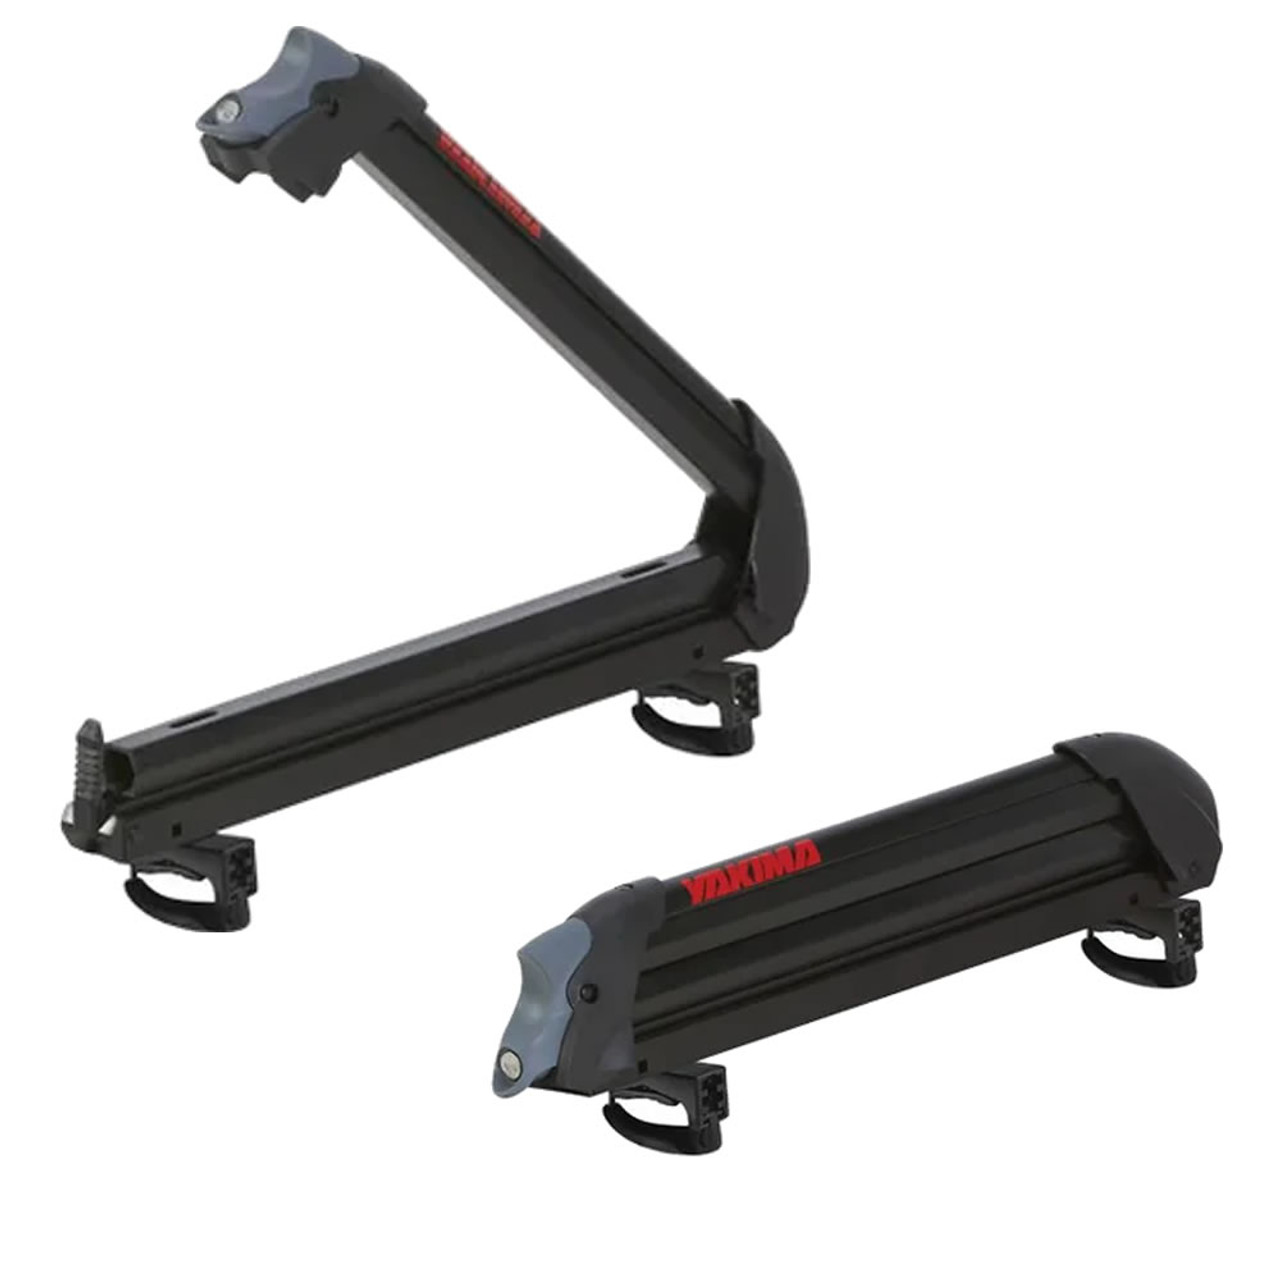 Fishing Rod Mounts and Holders Components - Free Shipping on Orders Over  $109 at Summit Racing